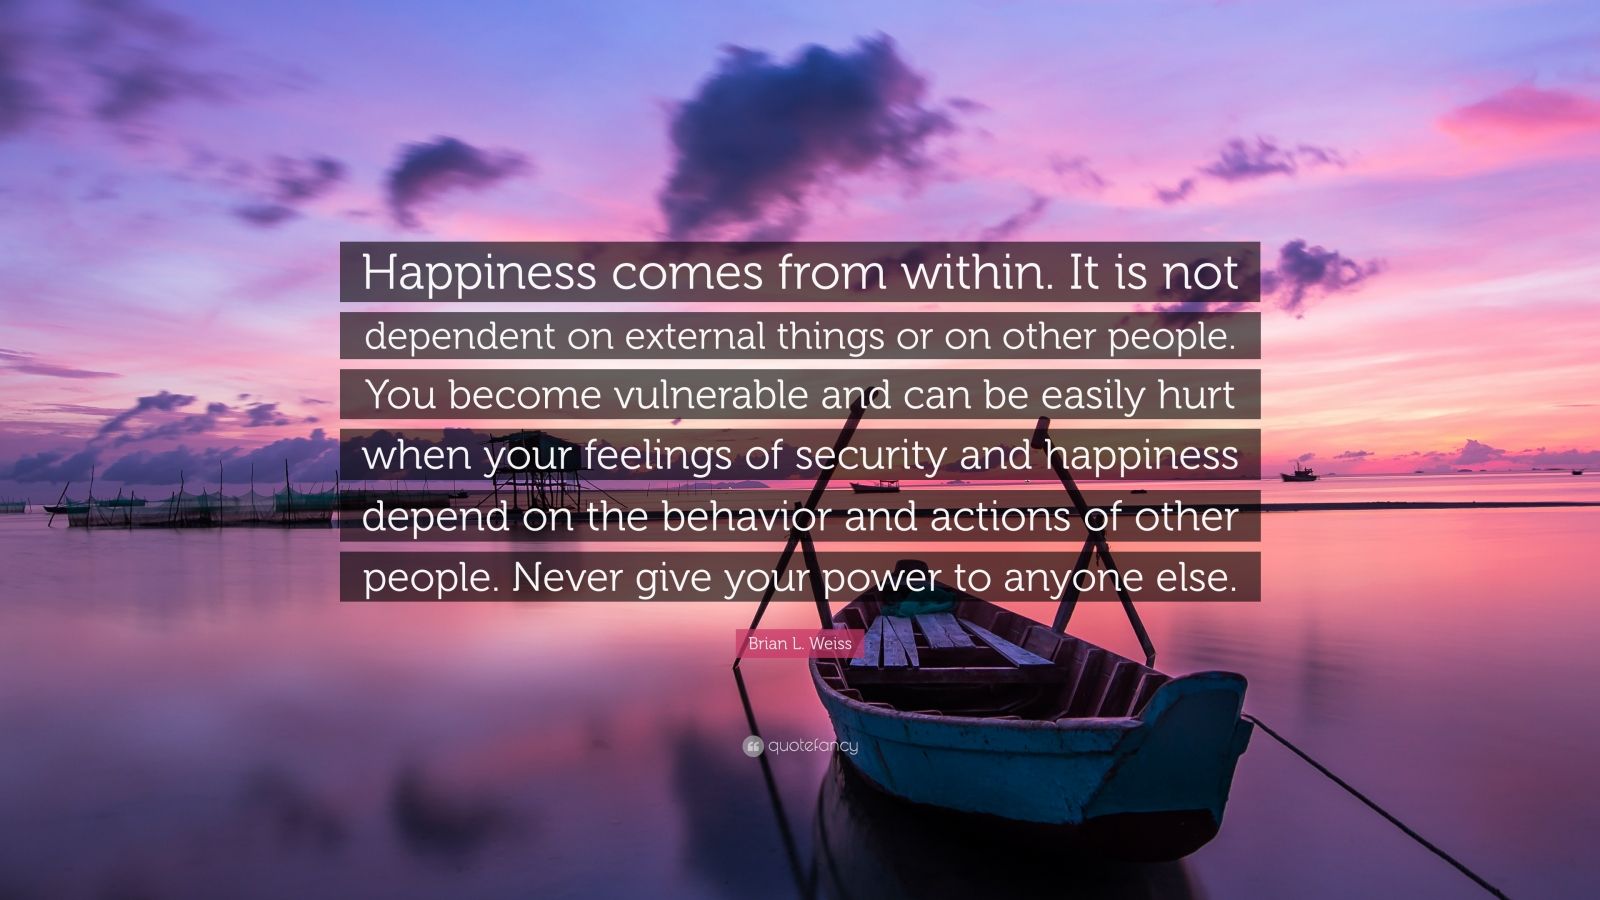 how to not be dependent on others for happiness